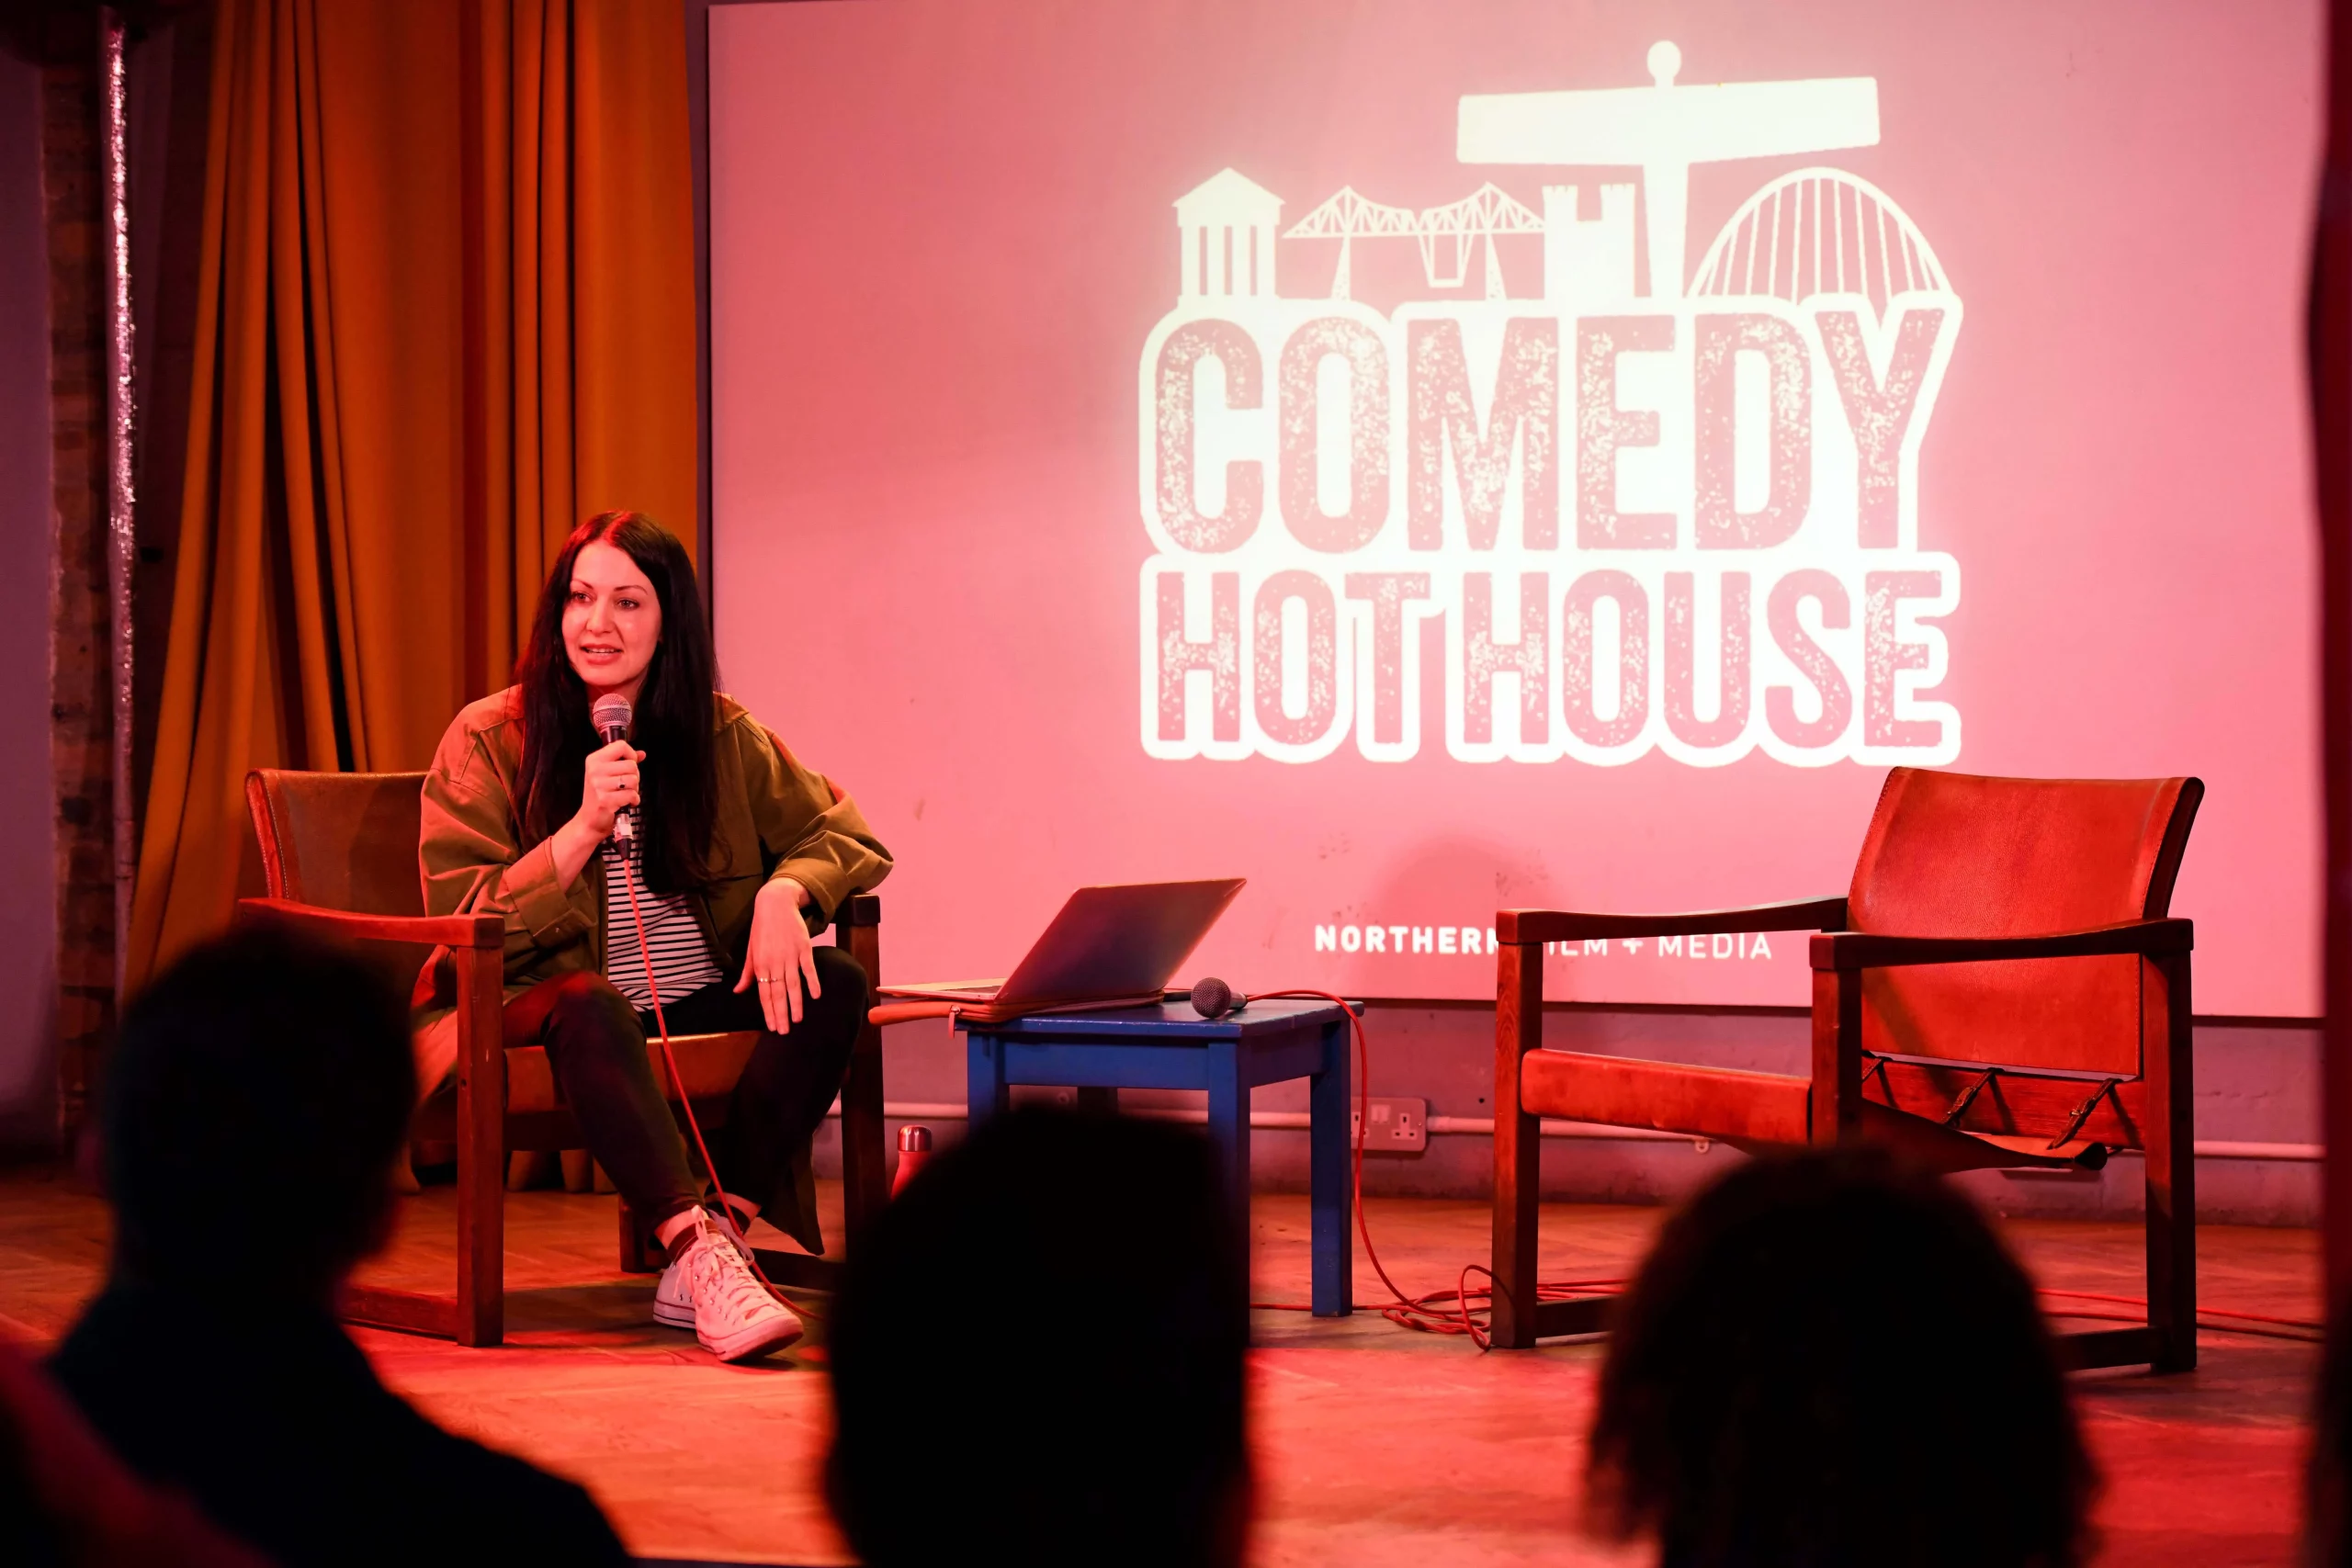 North East Comedy Hot House